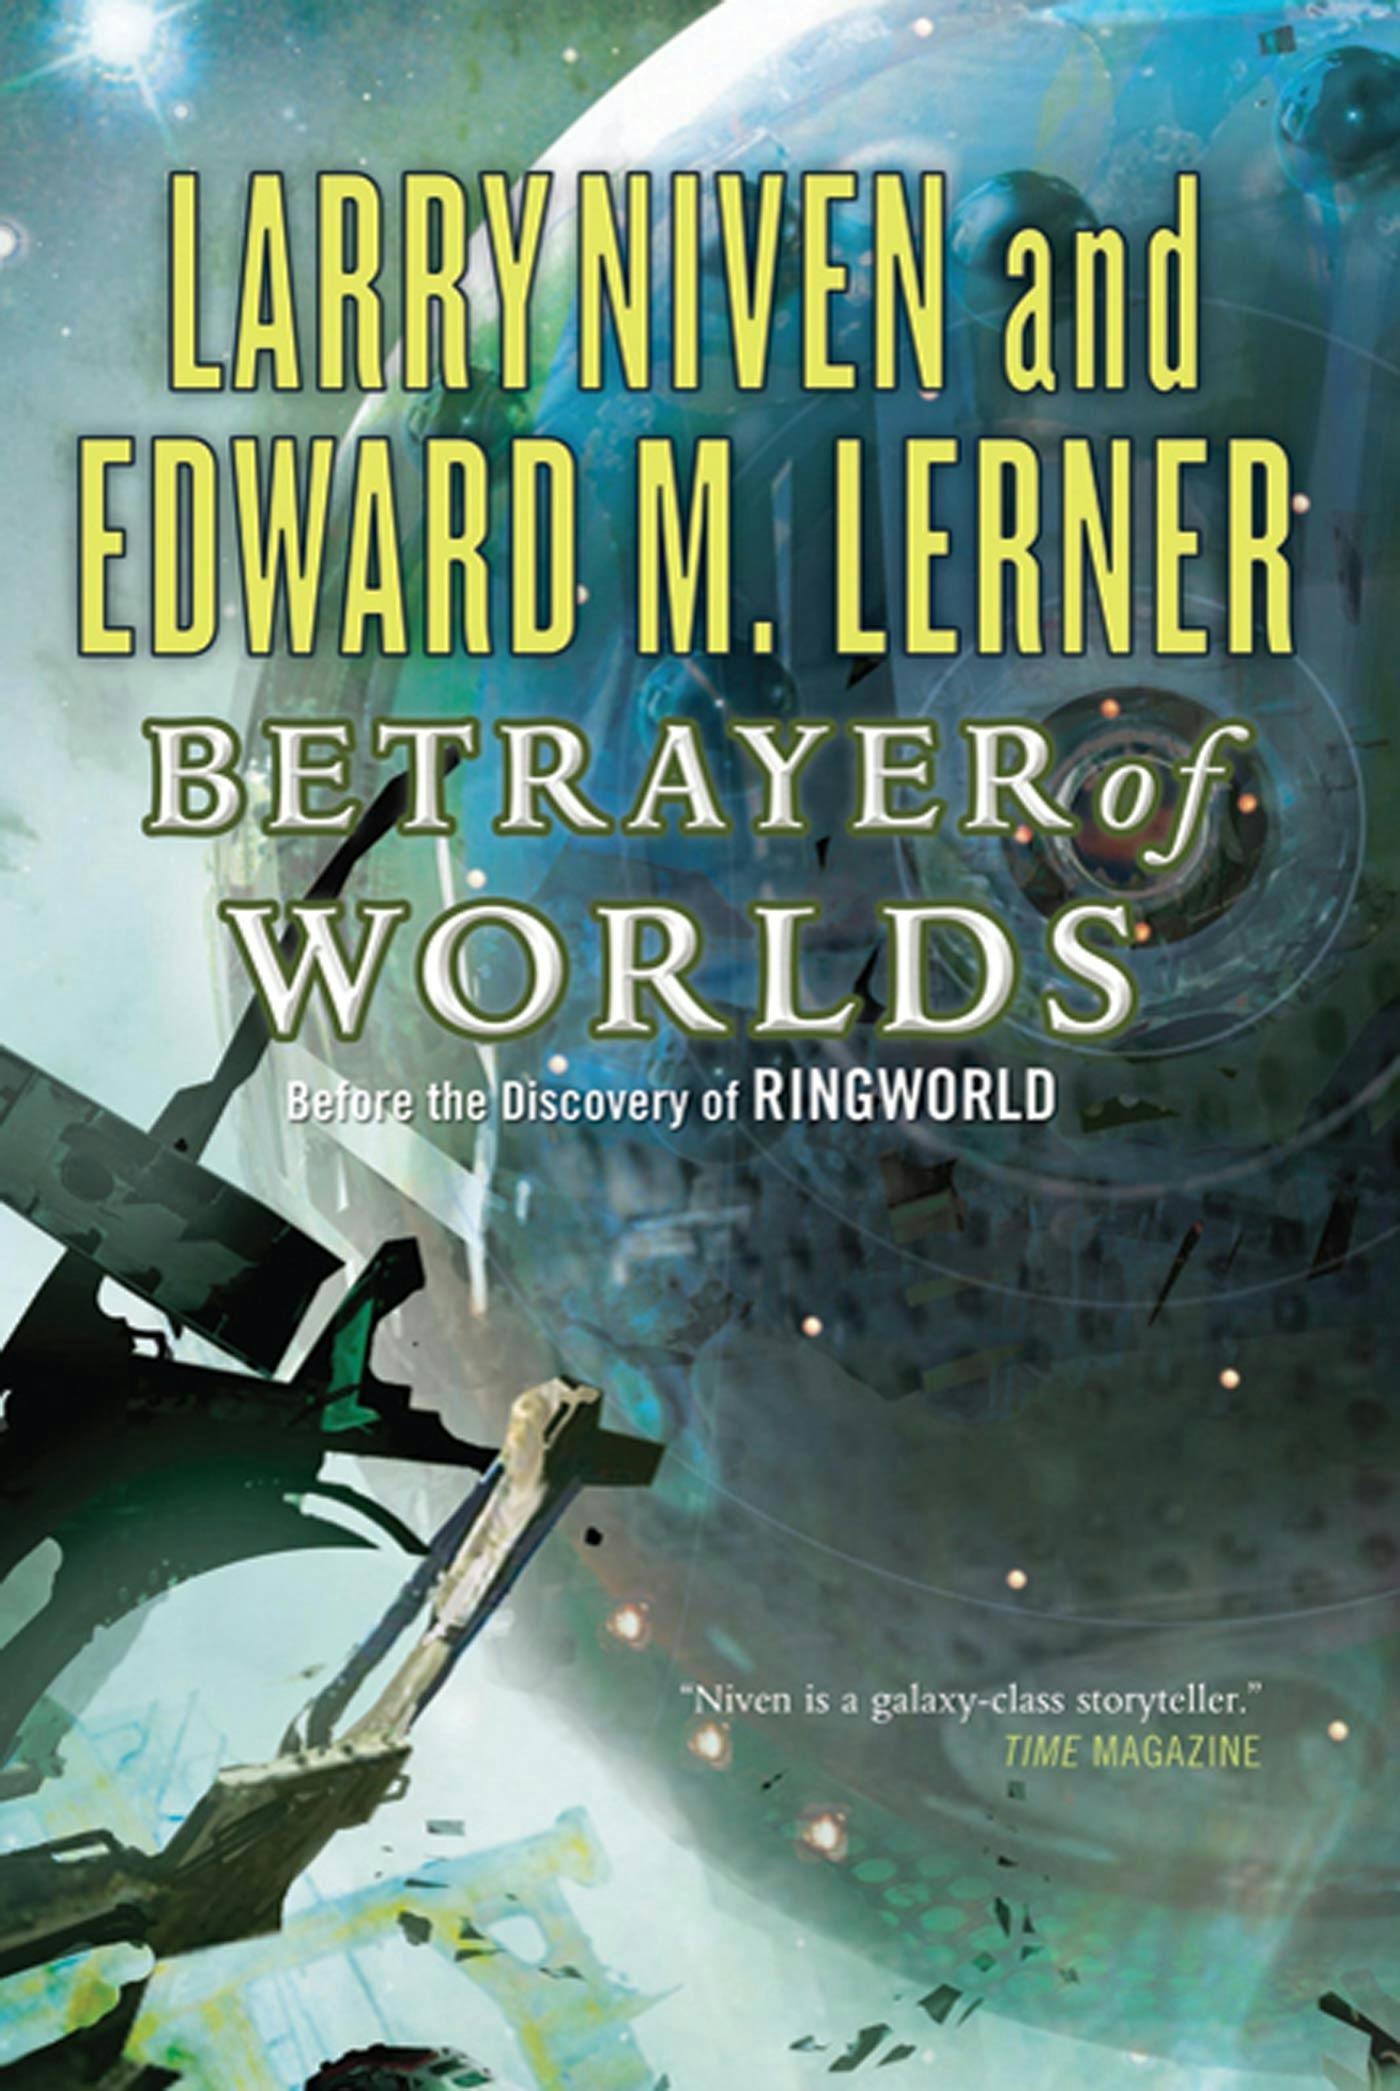 Cover for the book titled as: Betrayer of Worlds